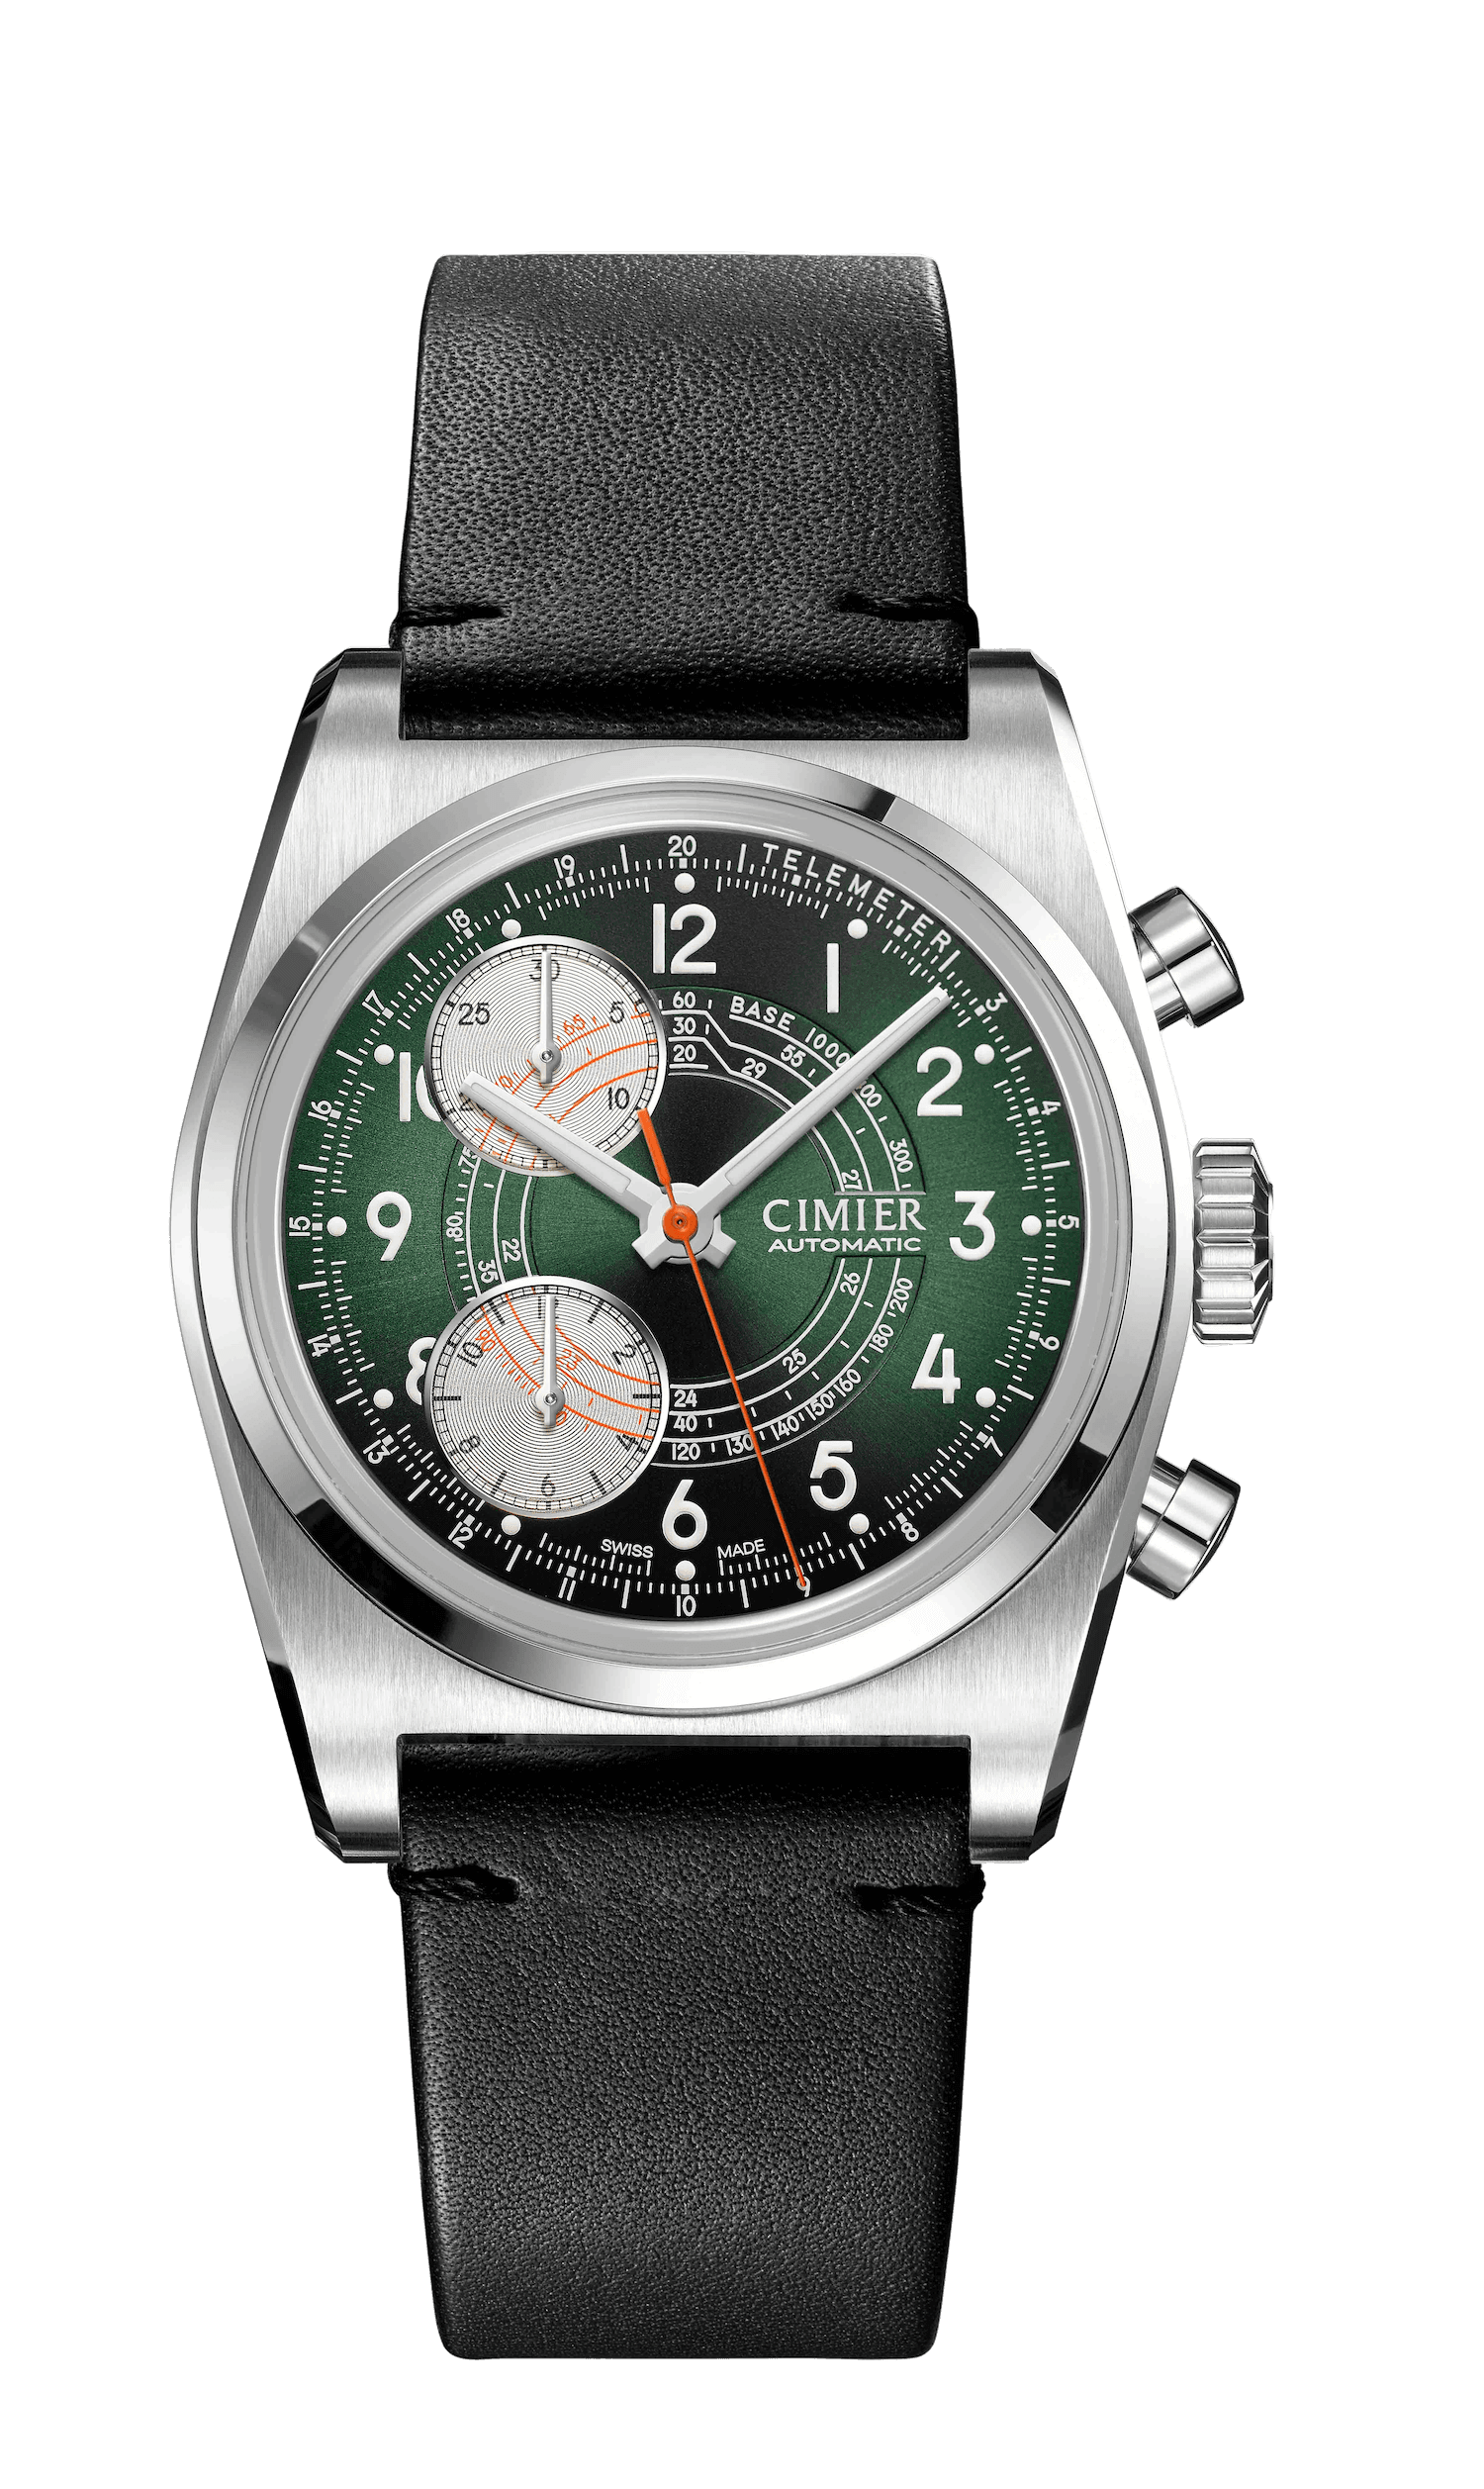 Cimier 711 Heritage Chronograph wristwatch with green dial and leather strap